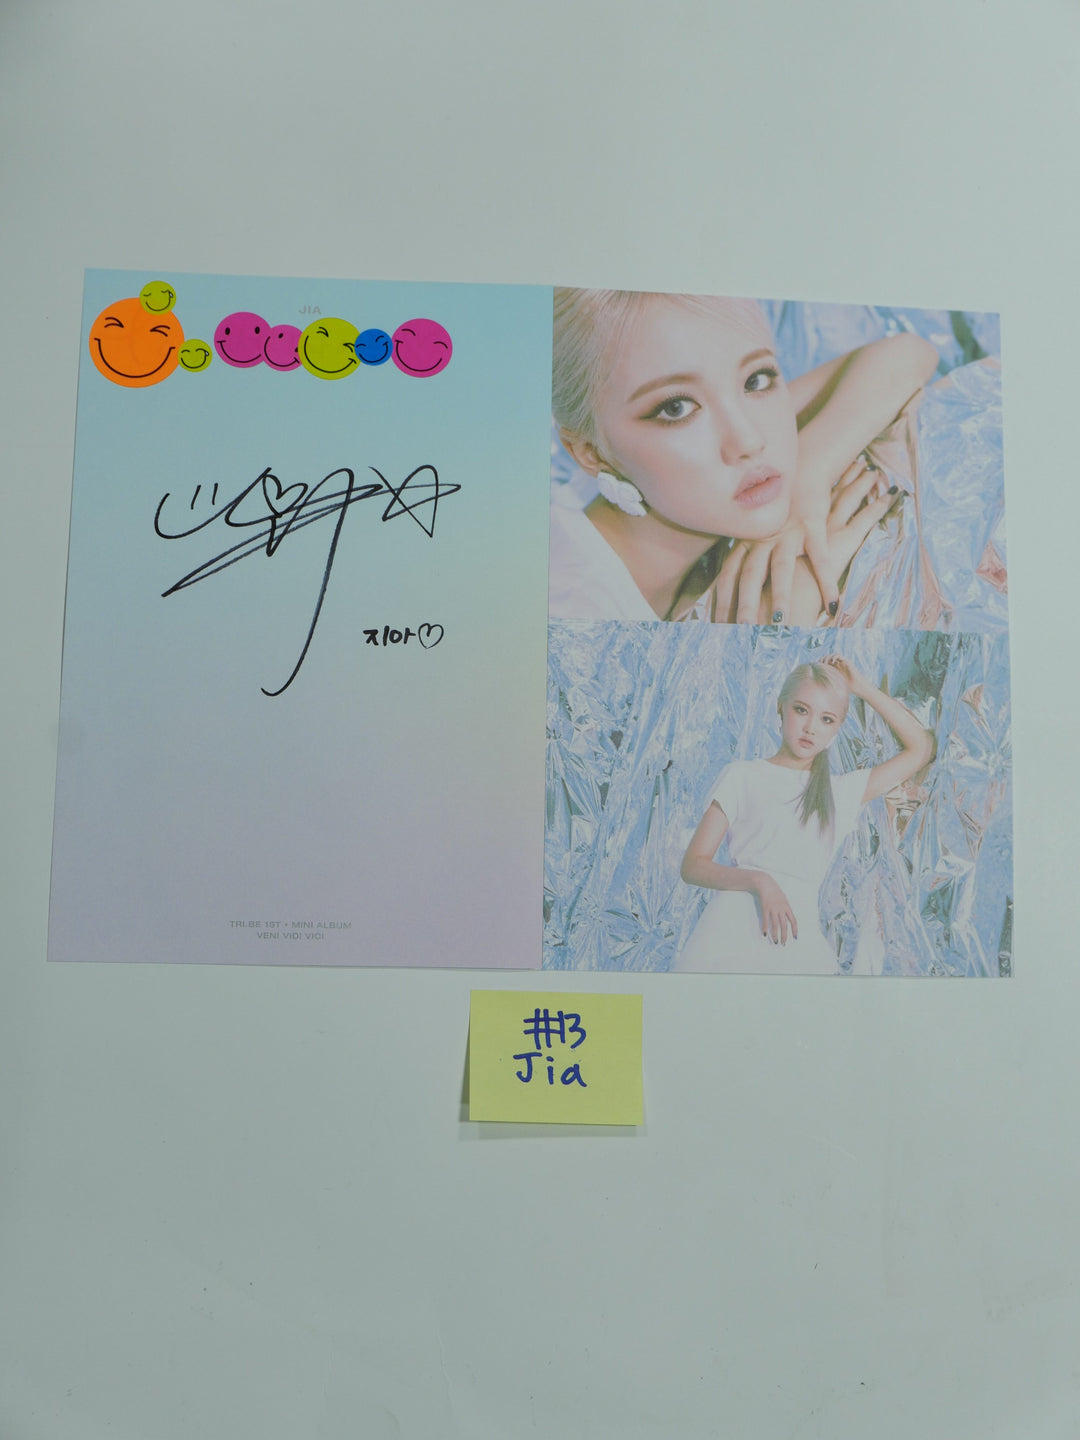 TRI.BE ‘VENI VIDI VICI’ 1st – A Cut Page From Fansign Event Albums